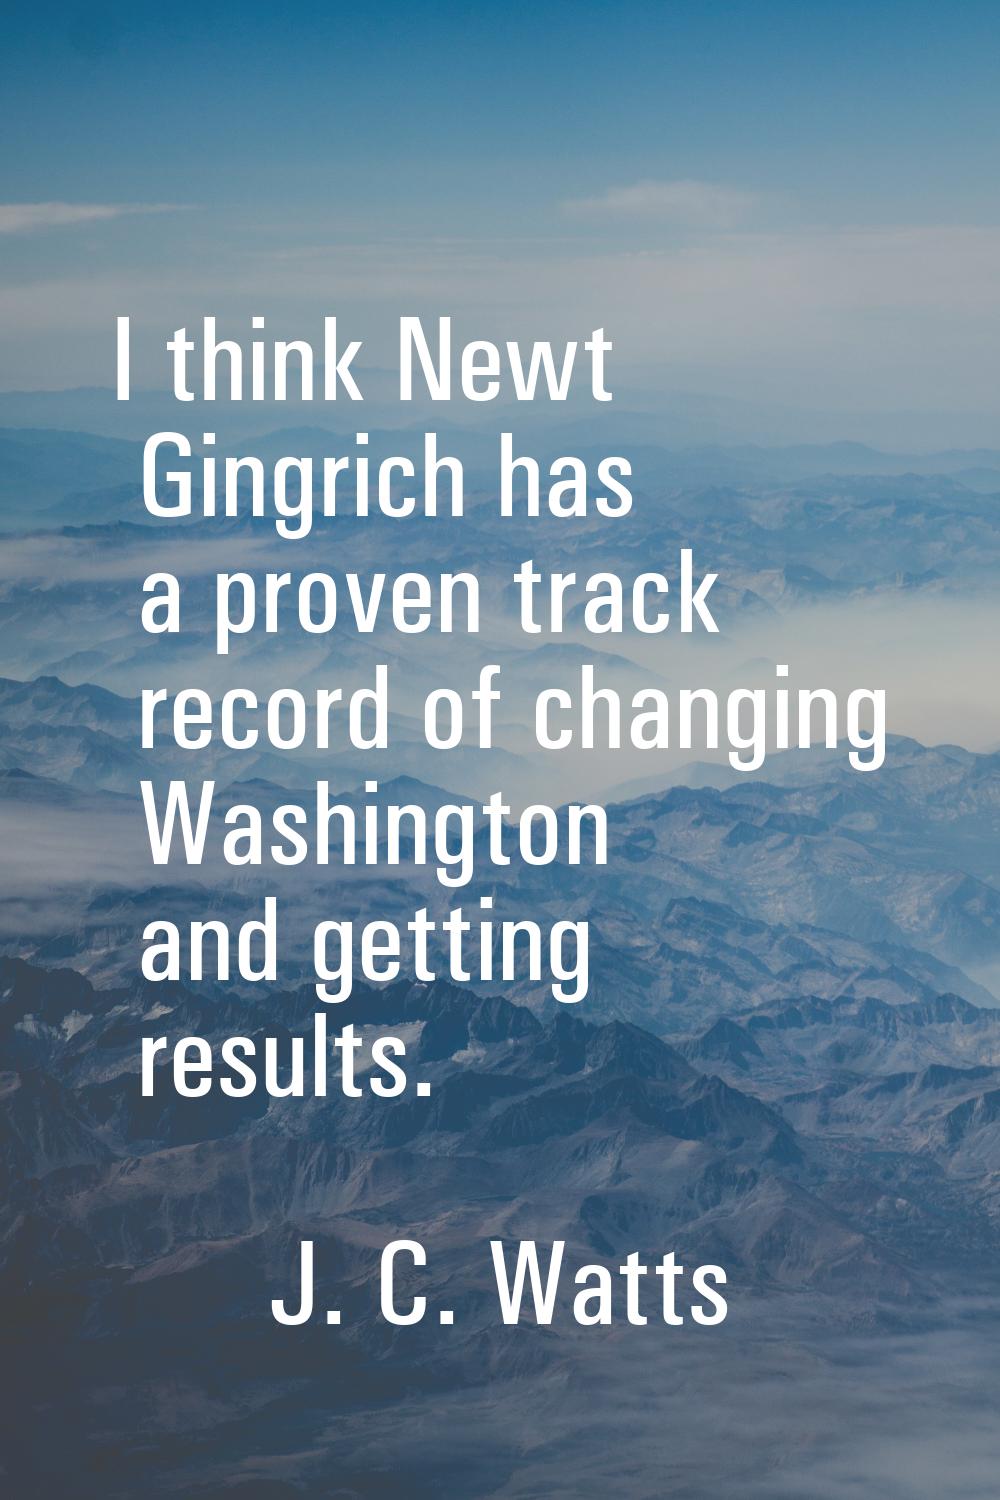 I think Newt Gingrich has a proven track record of changing Washington and getting results.